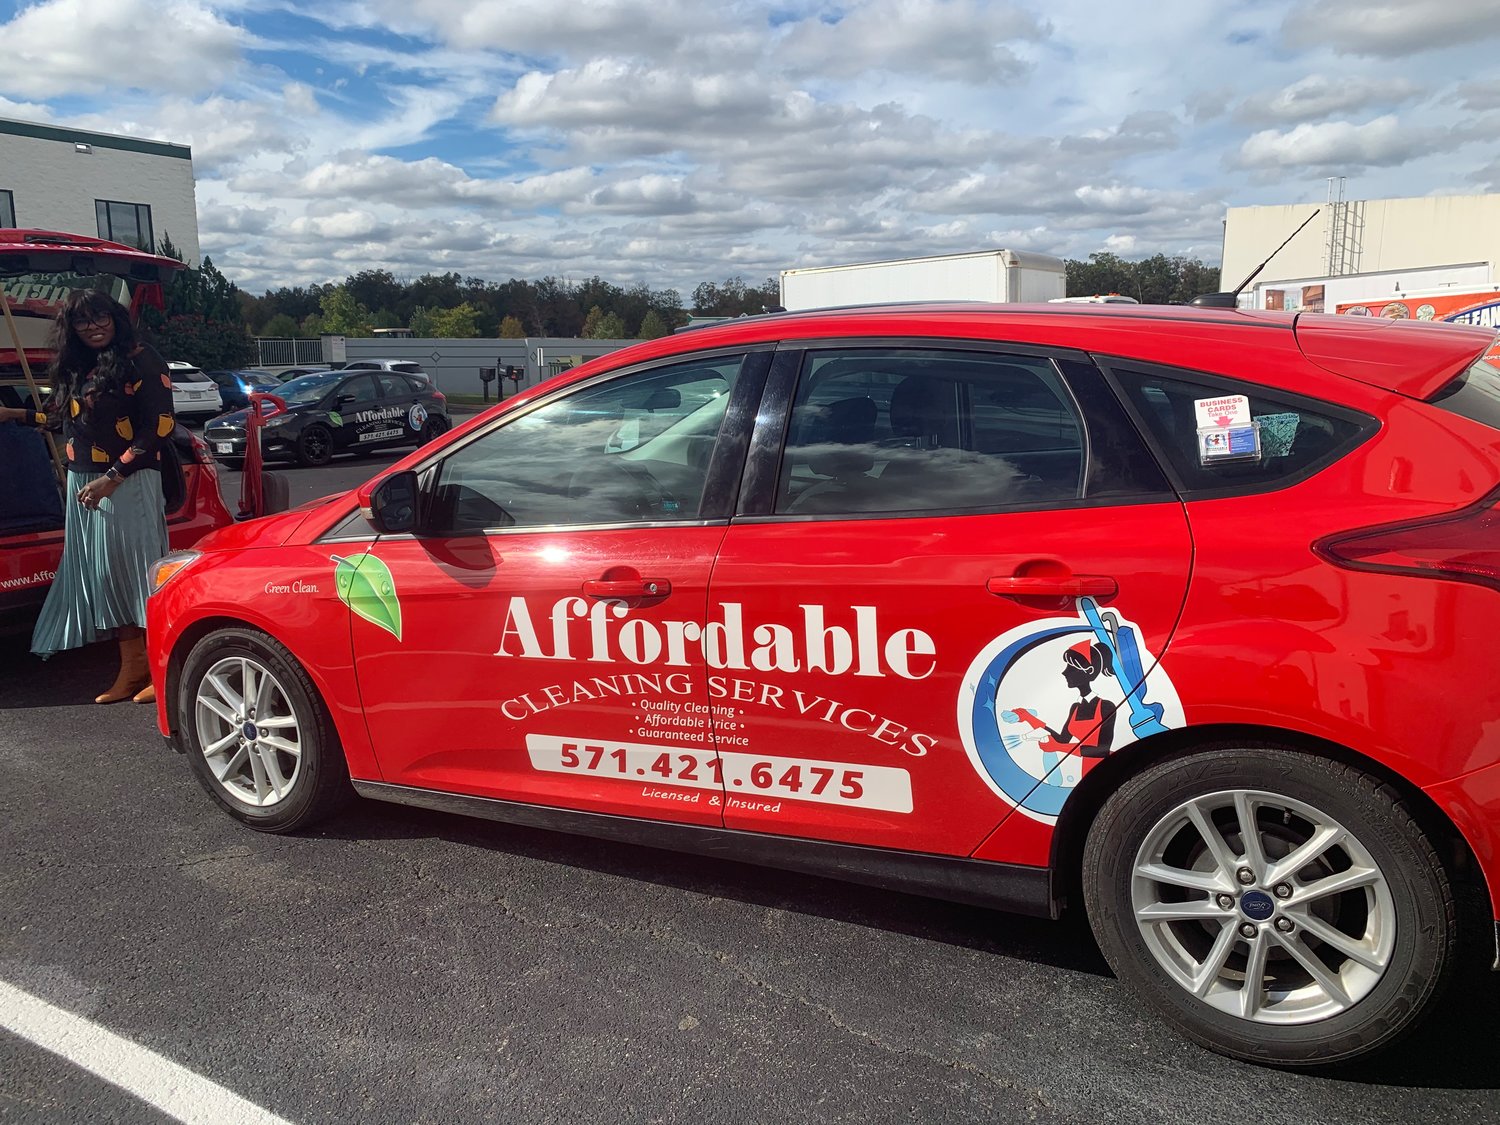 Affordable Cleaning Services is recognizable by the company's signature red cars displaying the ACS logo.